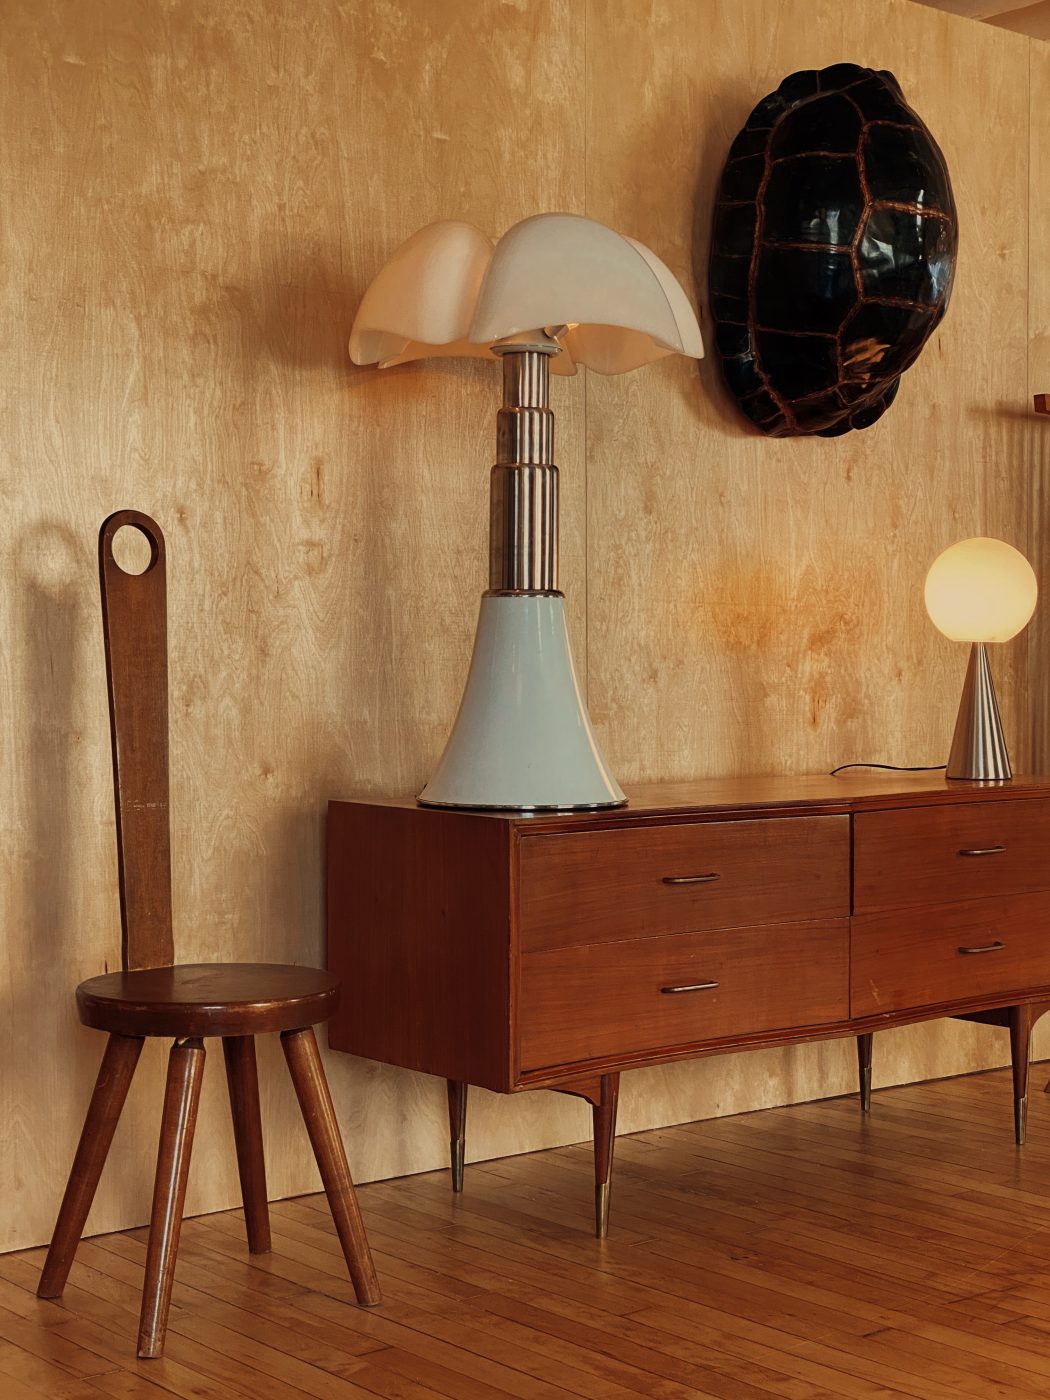 a William Fetner keyhole chair shares space with Danish sideboard and a large Gae Aulenti adjustable lamp